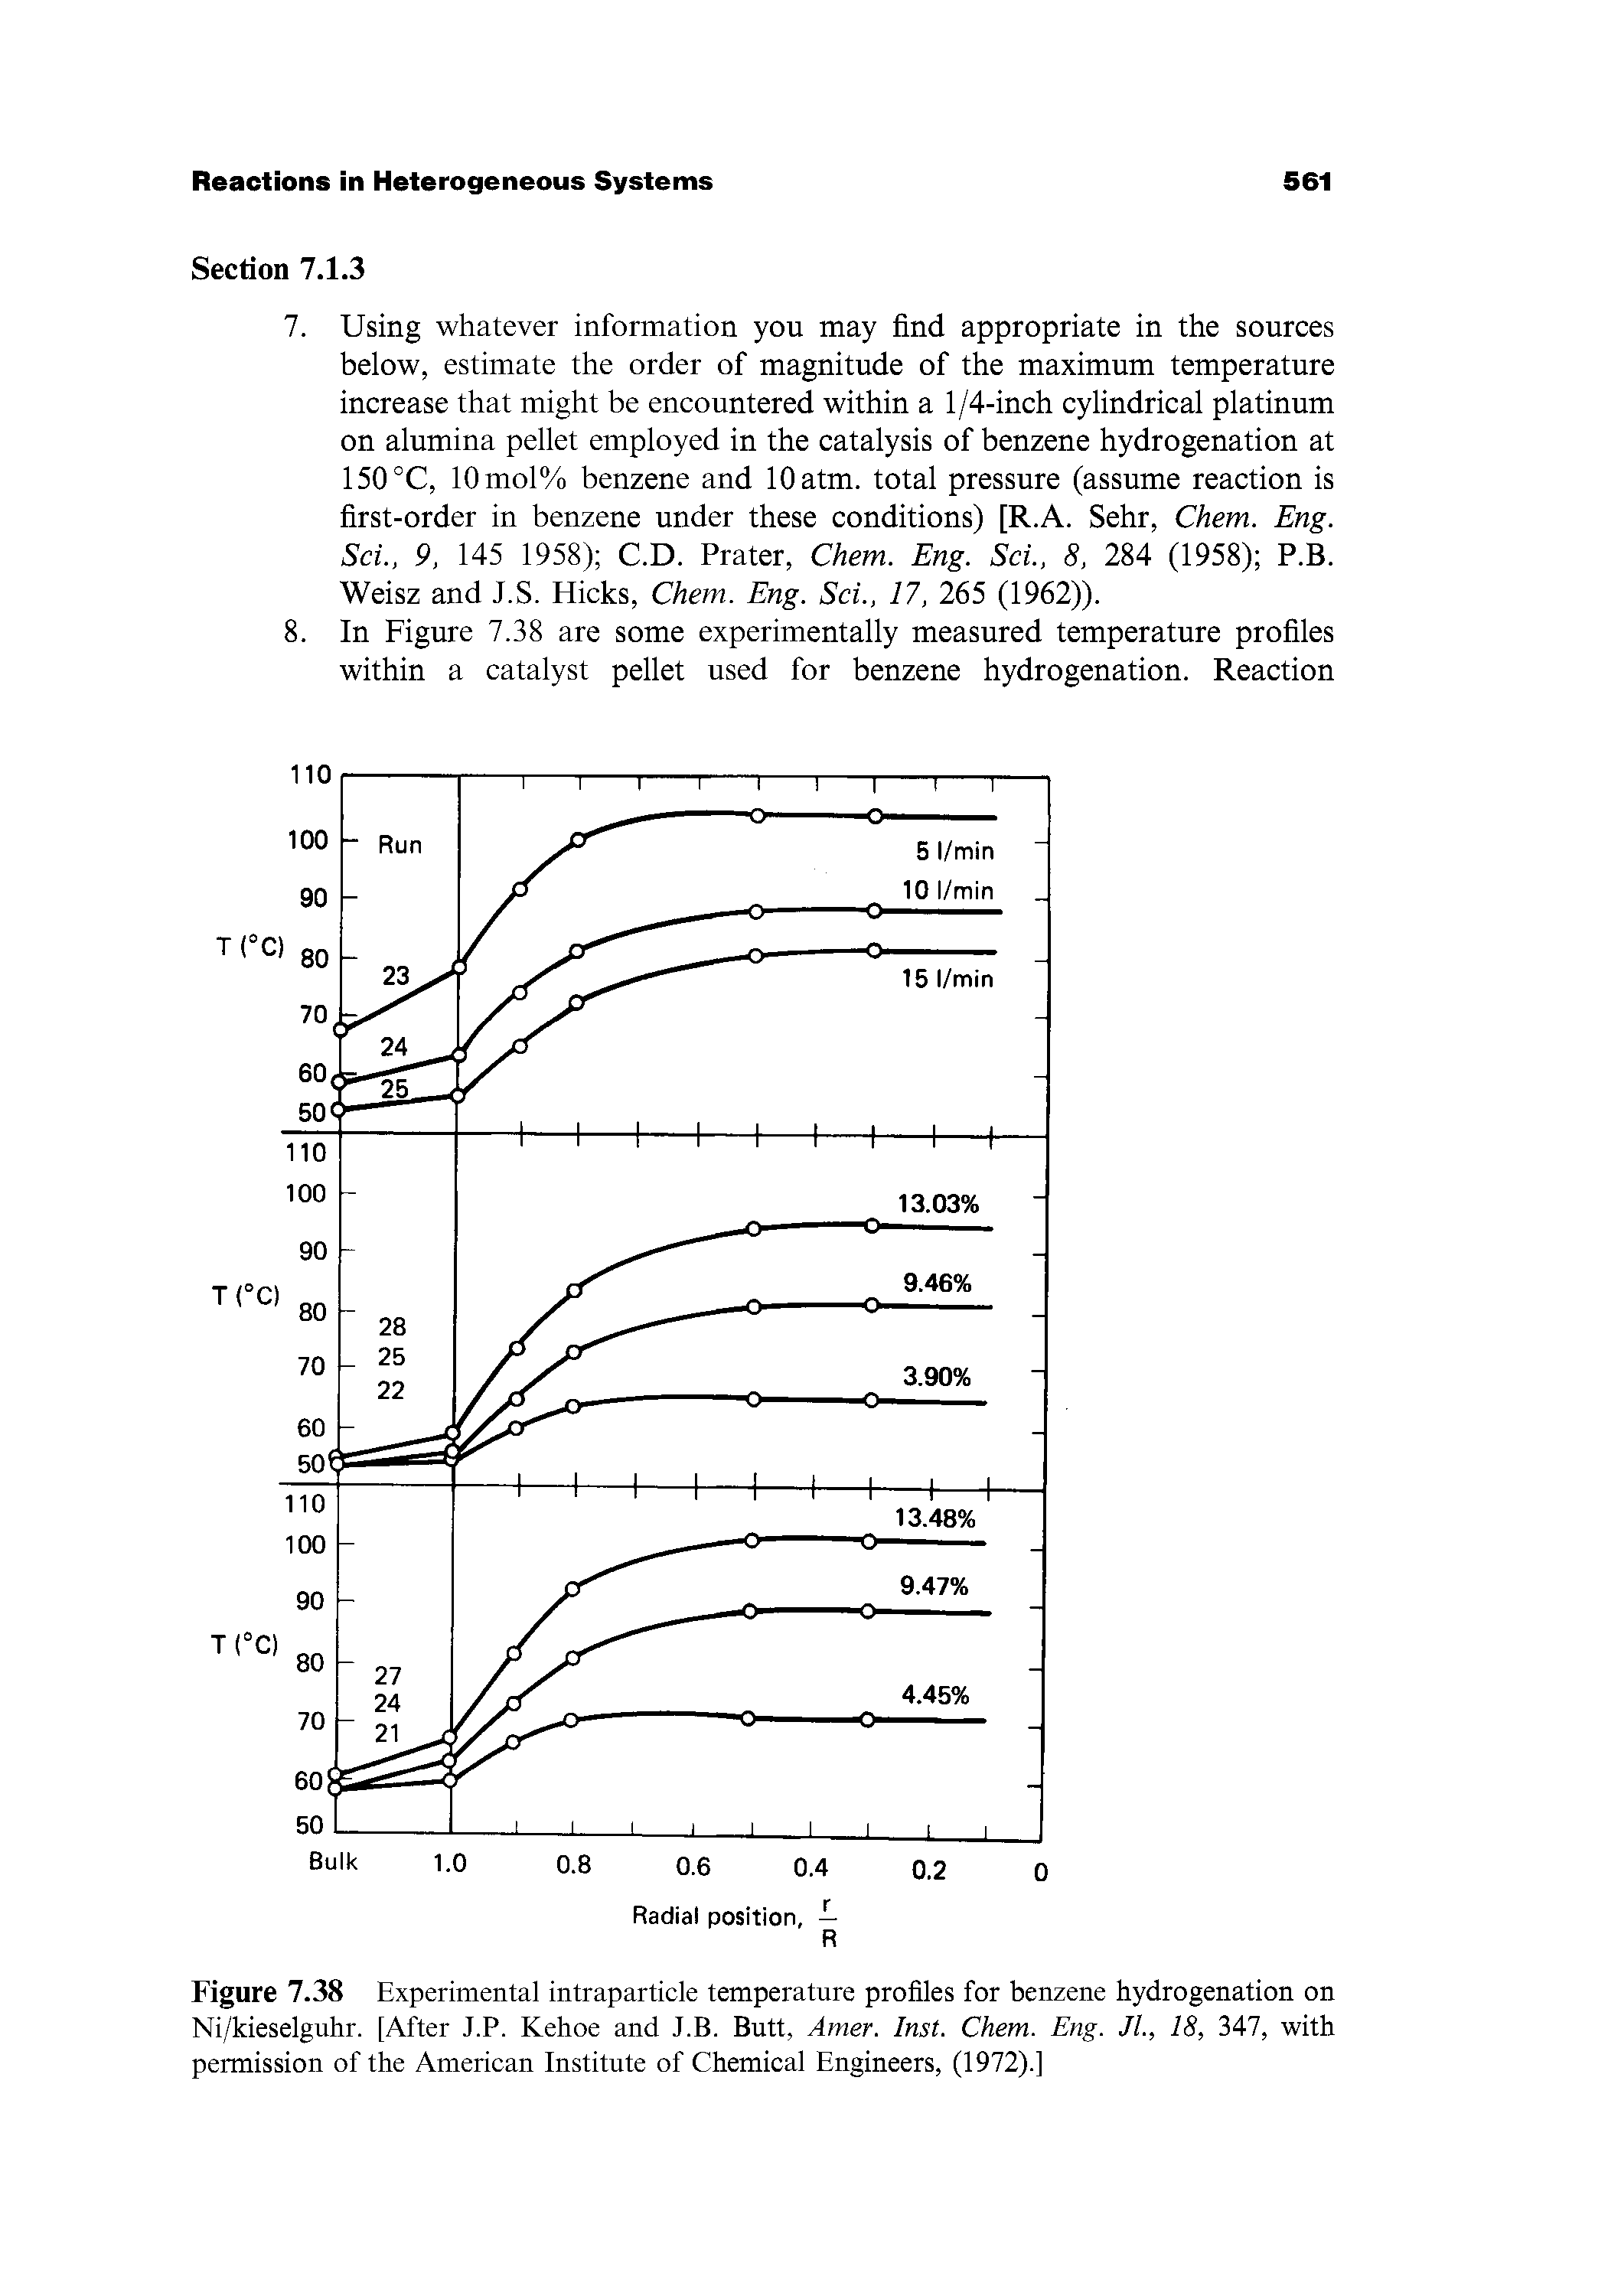 Figure 7.38 Experimental intraparticle temperature profiles for benzene hydrogenation on Ni/kieselguhr. [After J.P. Kehoe and J.B. Butt, Amer. Inst. Chem. Eng. Jl., 18, 347, with permission of the American Institute of Chemical Engineers, (1972).]...